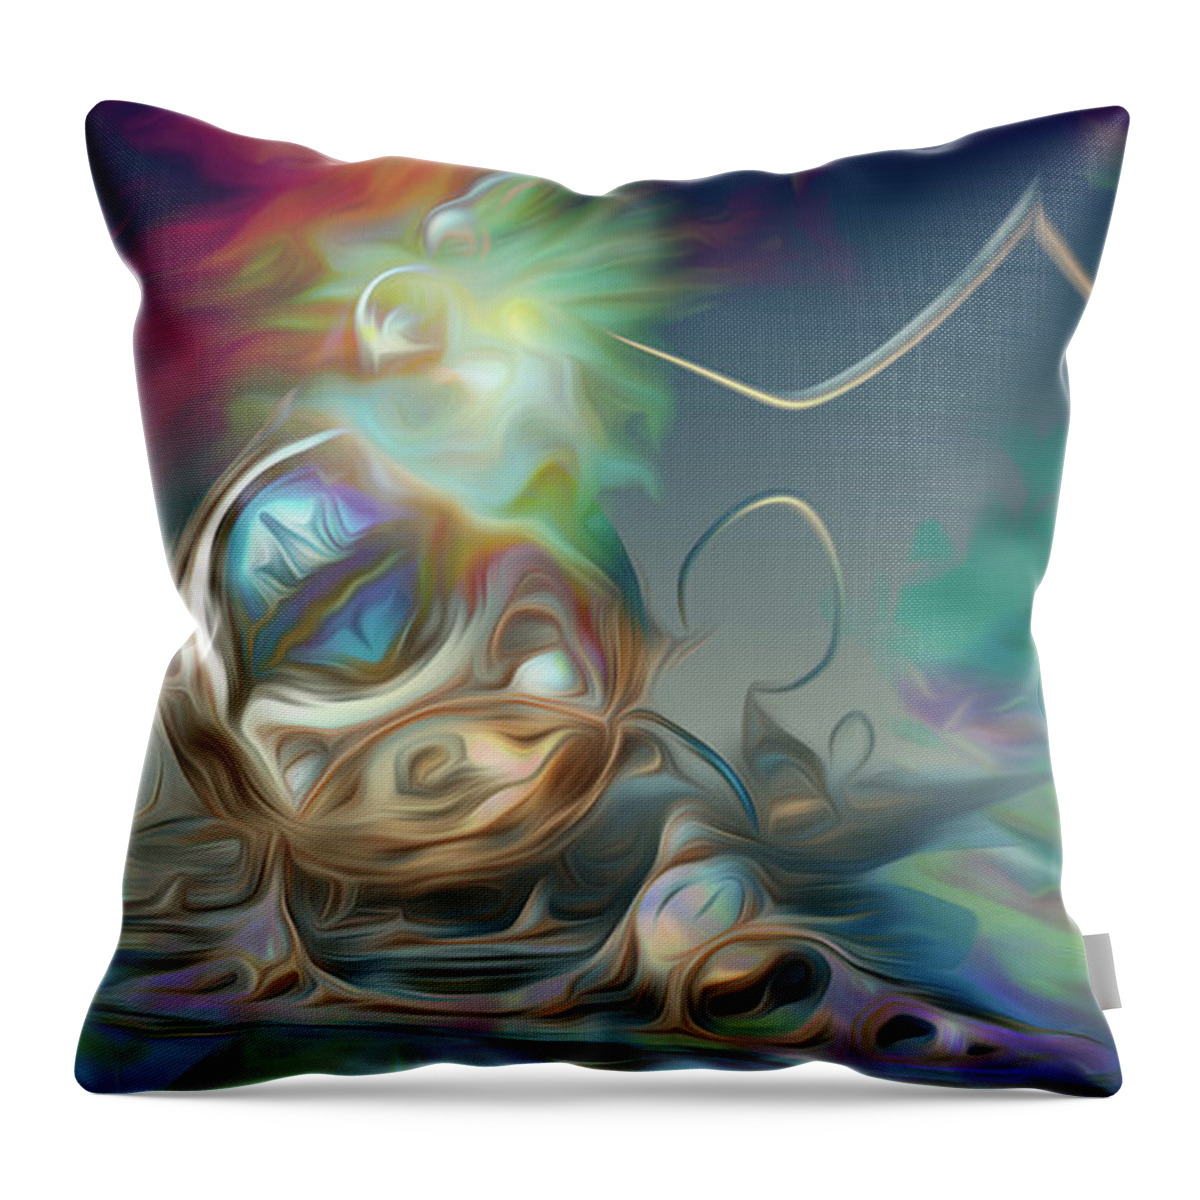 Visionary Throw Pillow featuring the digital art N.o.w. by Jeff Malderez